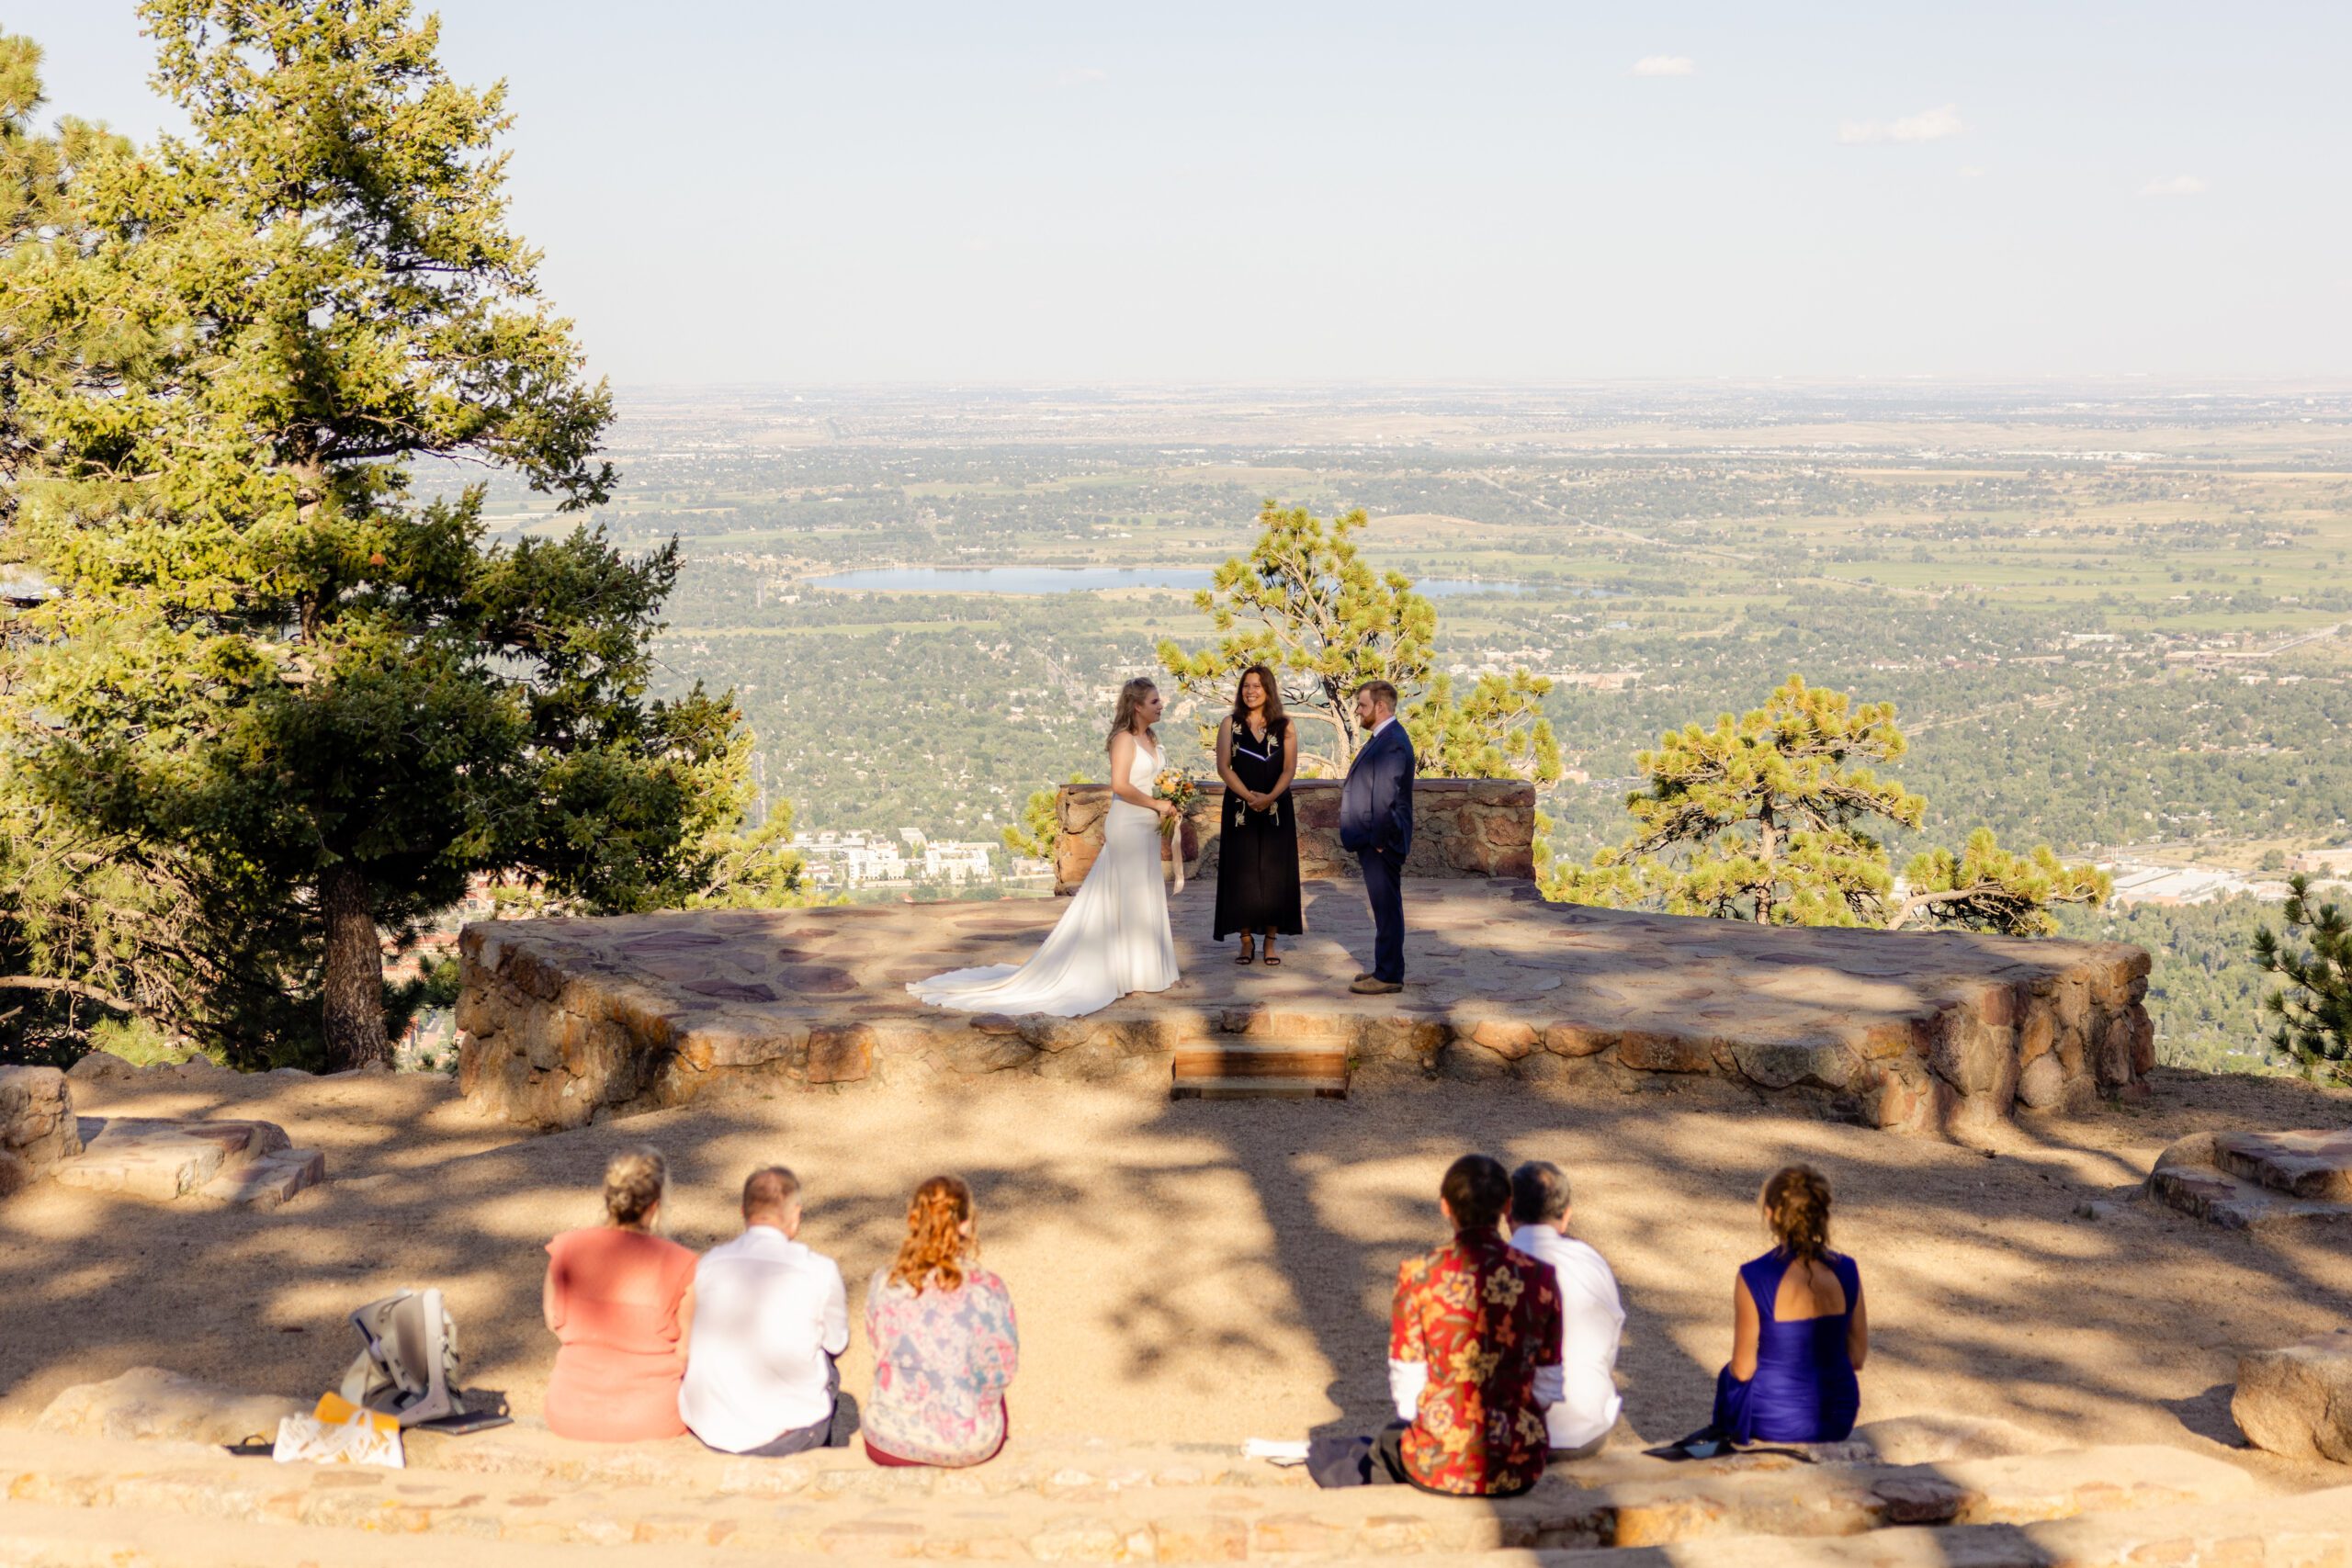 The Sunrise Amphitheater wedding ceremony with the bride and groom holding hands in front of their guests.